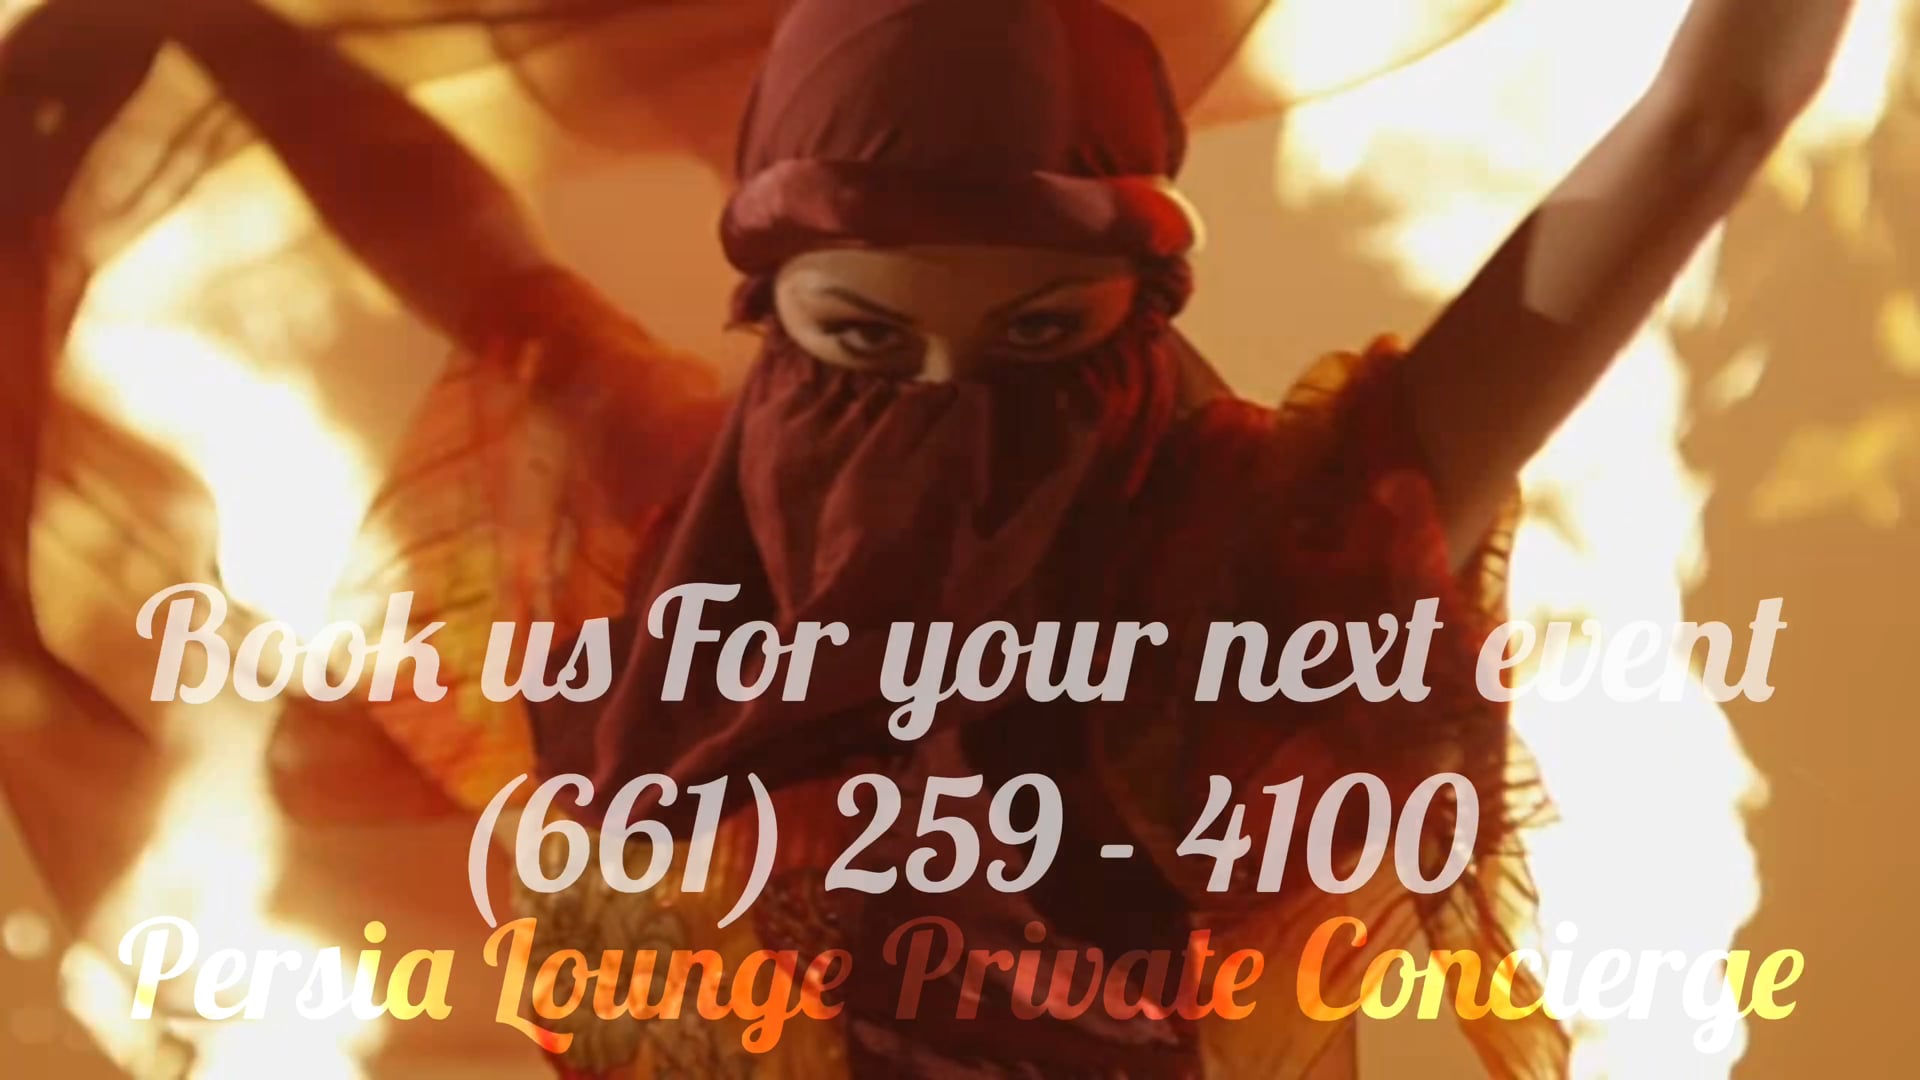 Persia Lounge x catering advertisement